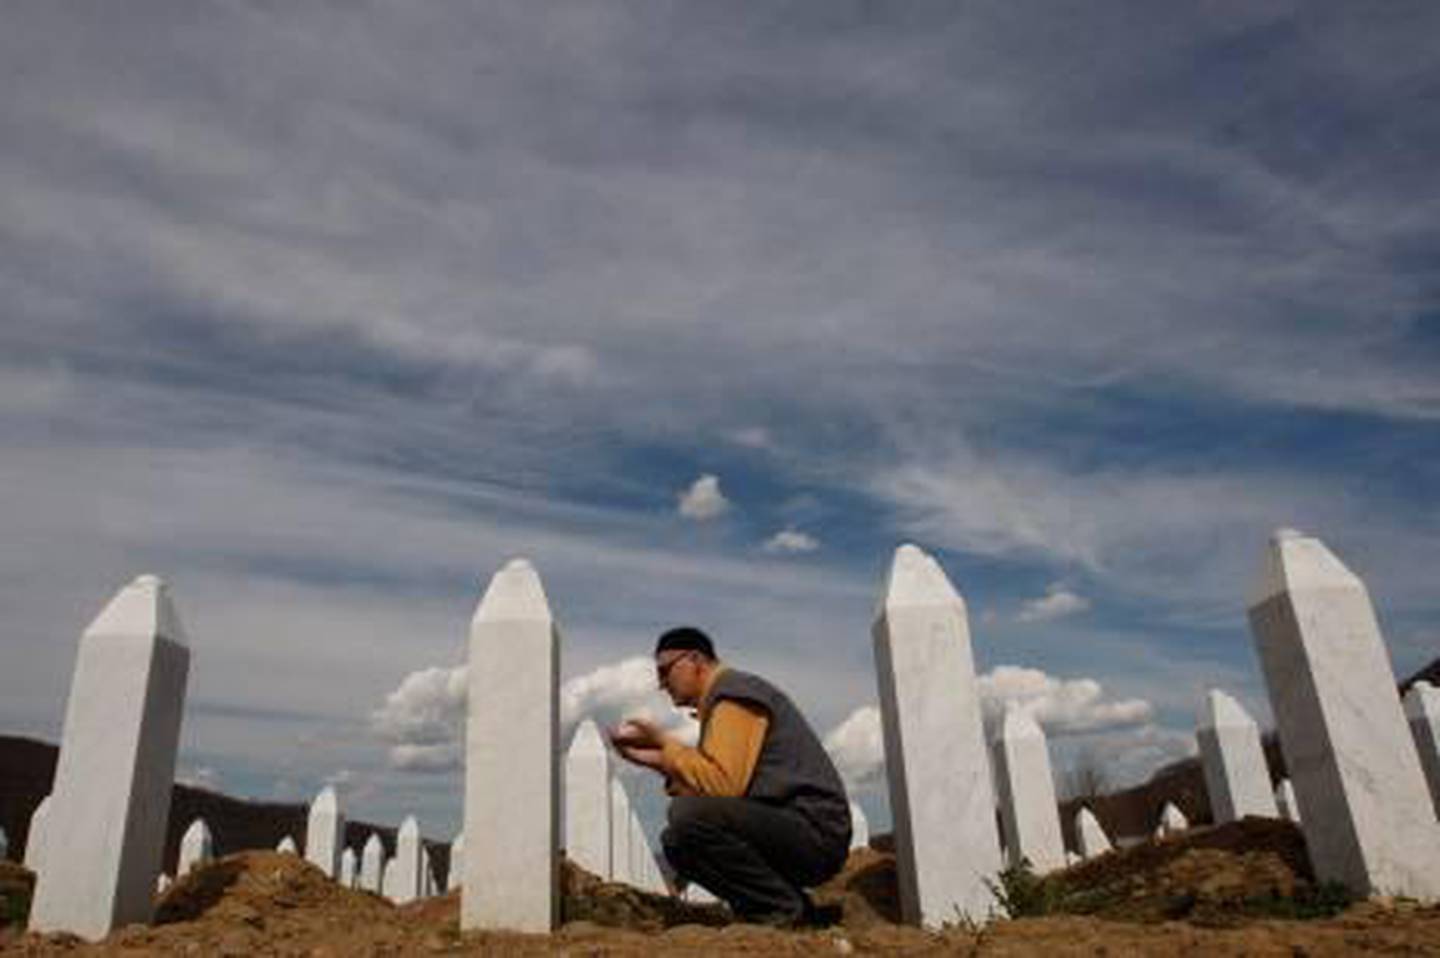 Bosnian Muslim man says a prayer in front of the grave stone of his relative at Memorial Center of Potocari, near Srebrenica, 70 kms norteast of Bosnian capital of Sarajevo, on Thursday April 1, 2010.  Serbia's parliament has apologized to the Bosnian Muslim victims of the 1995 Srebrenica massacre Wednesday, ending years of denial, a move which is being seen as a crucial part for reconciliation in the war-scarred Balkans. (AP Photo/Amel Emric) *** Local Caption ***  XAE107_BOSNIA_SREBRENICA_SRBIJA_APOLOGIZE.jpg